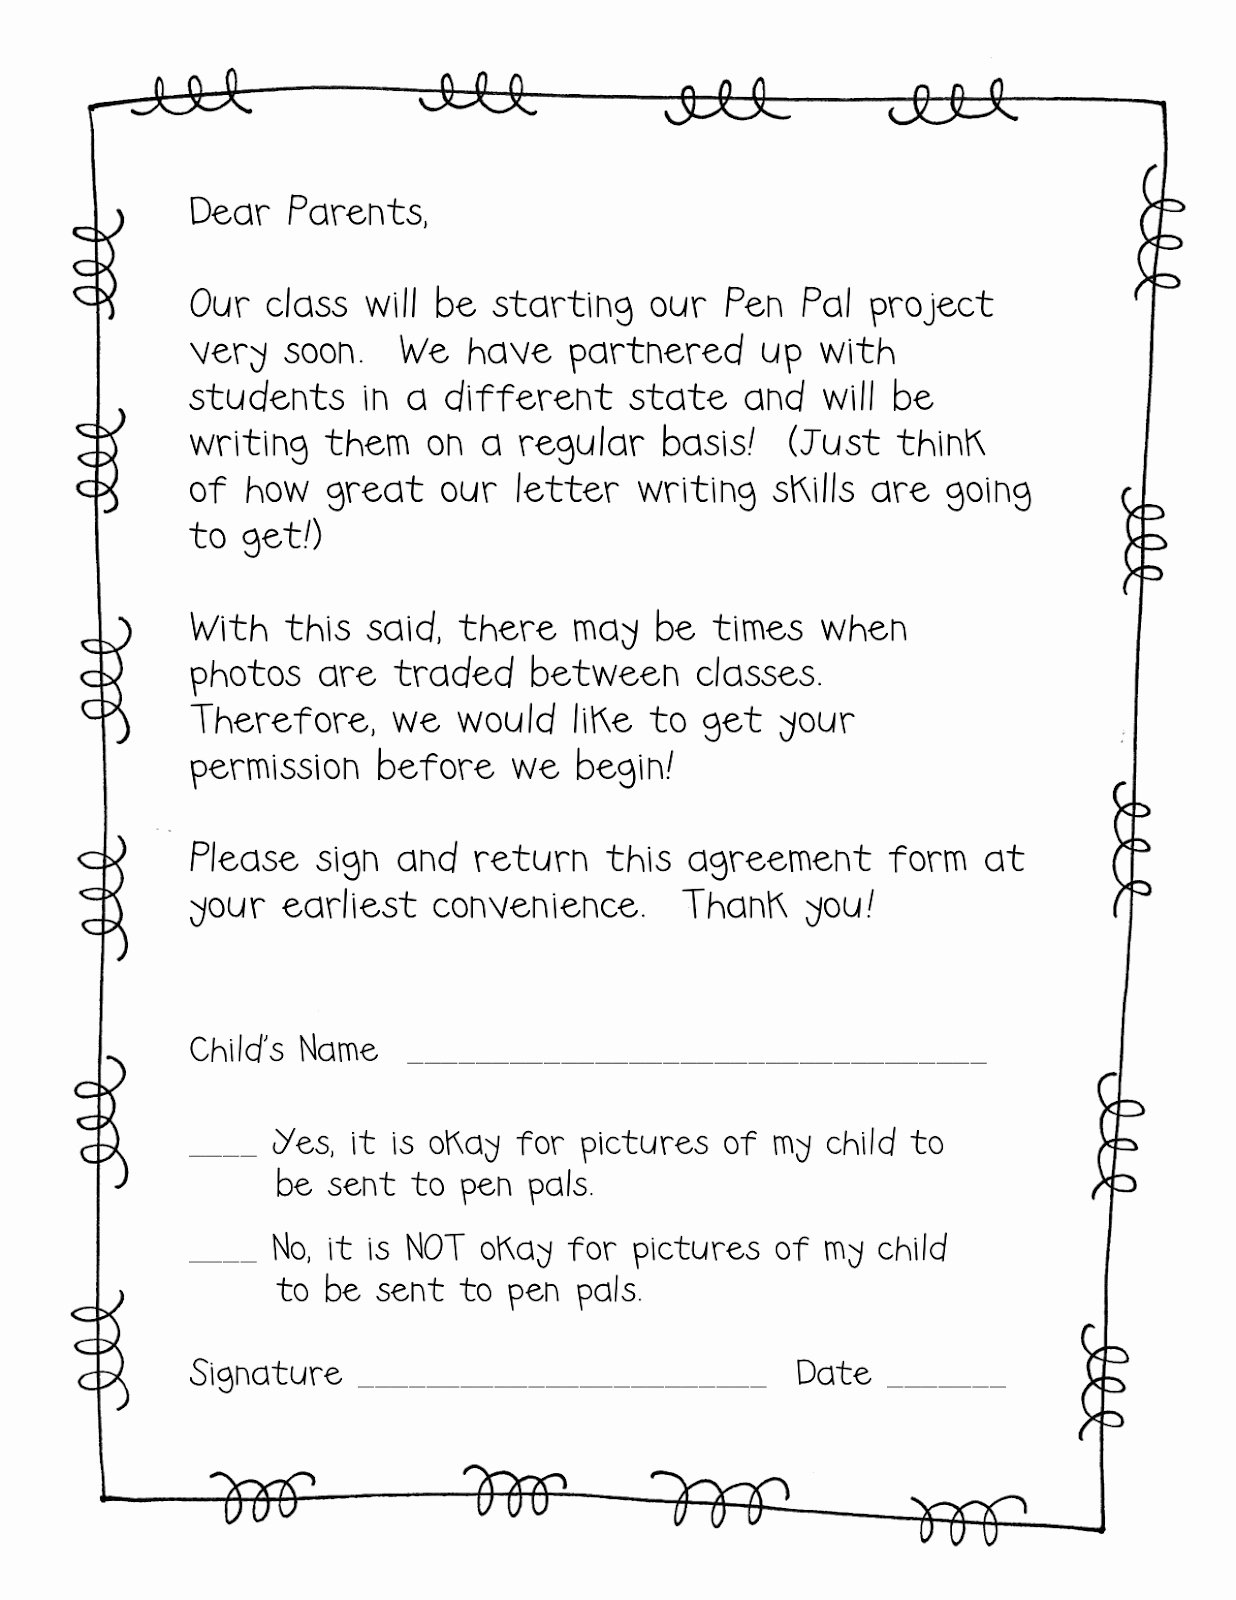 Letters to Parents Template Awesome form Frenzy Pen Pal Freebie Teacher Idea Factory